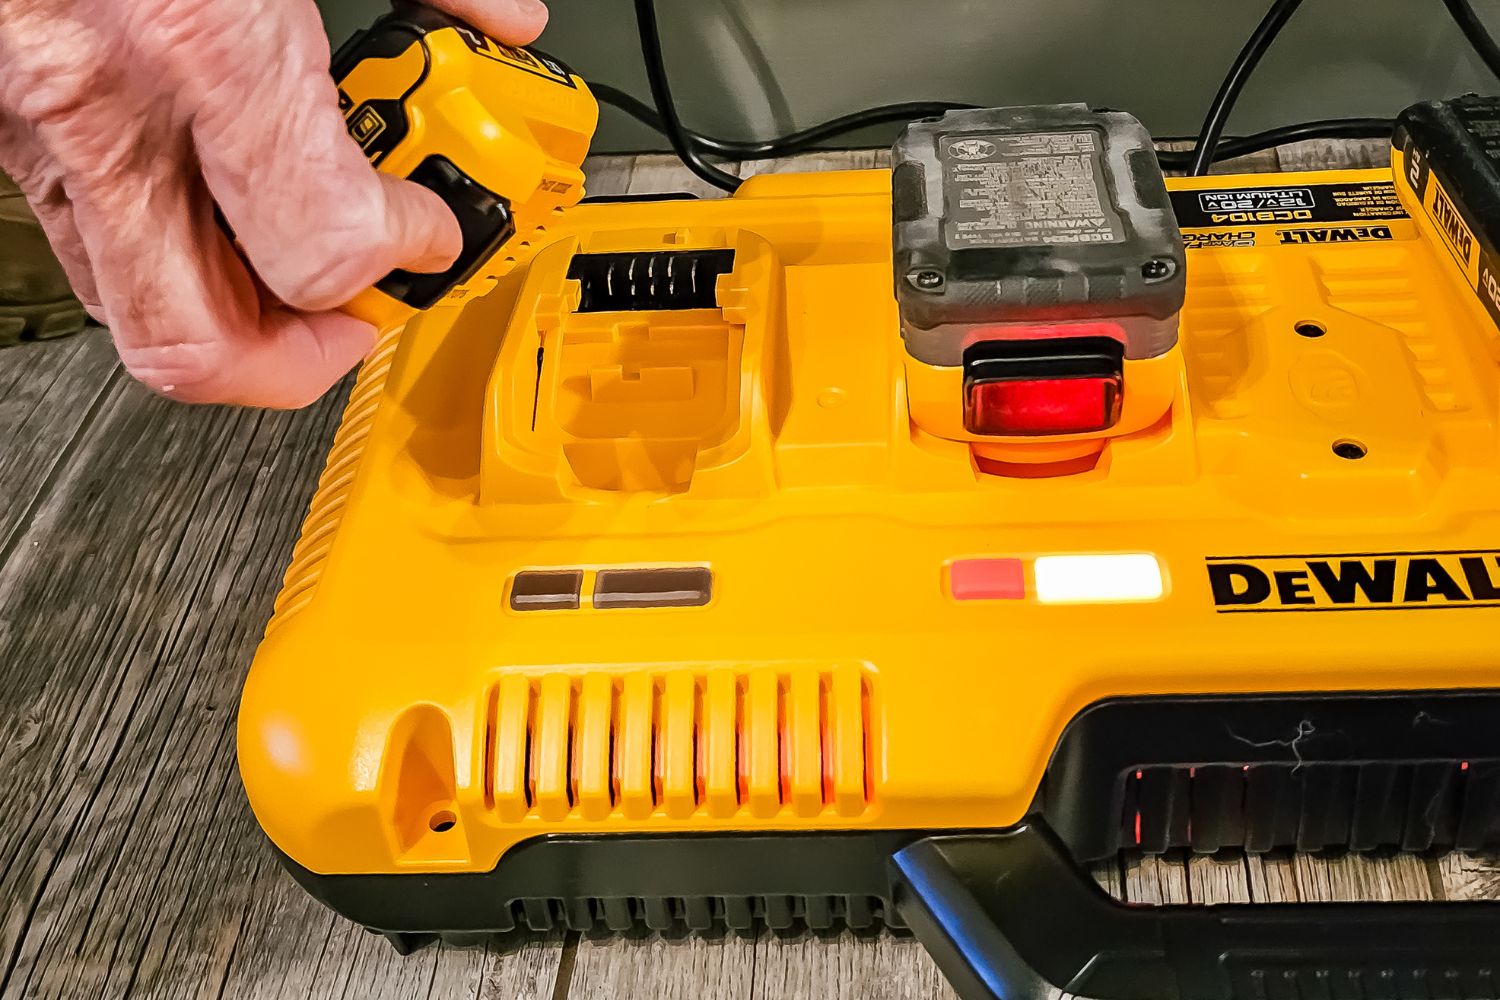 A person removing a charged battery from the DeWalt charging station.